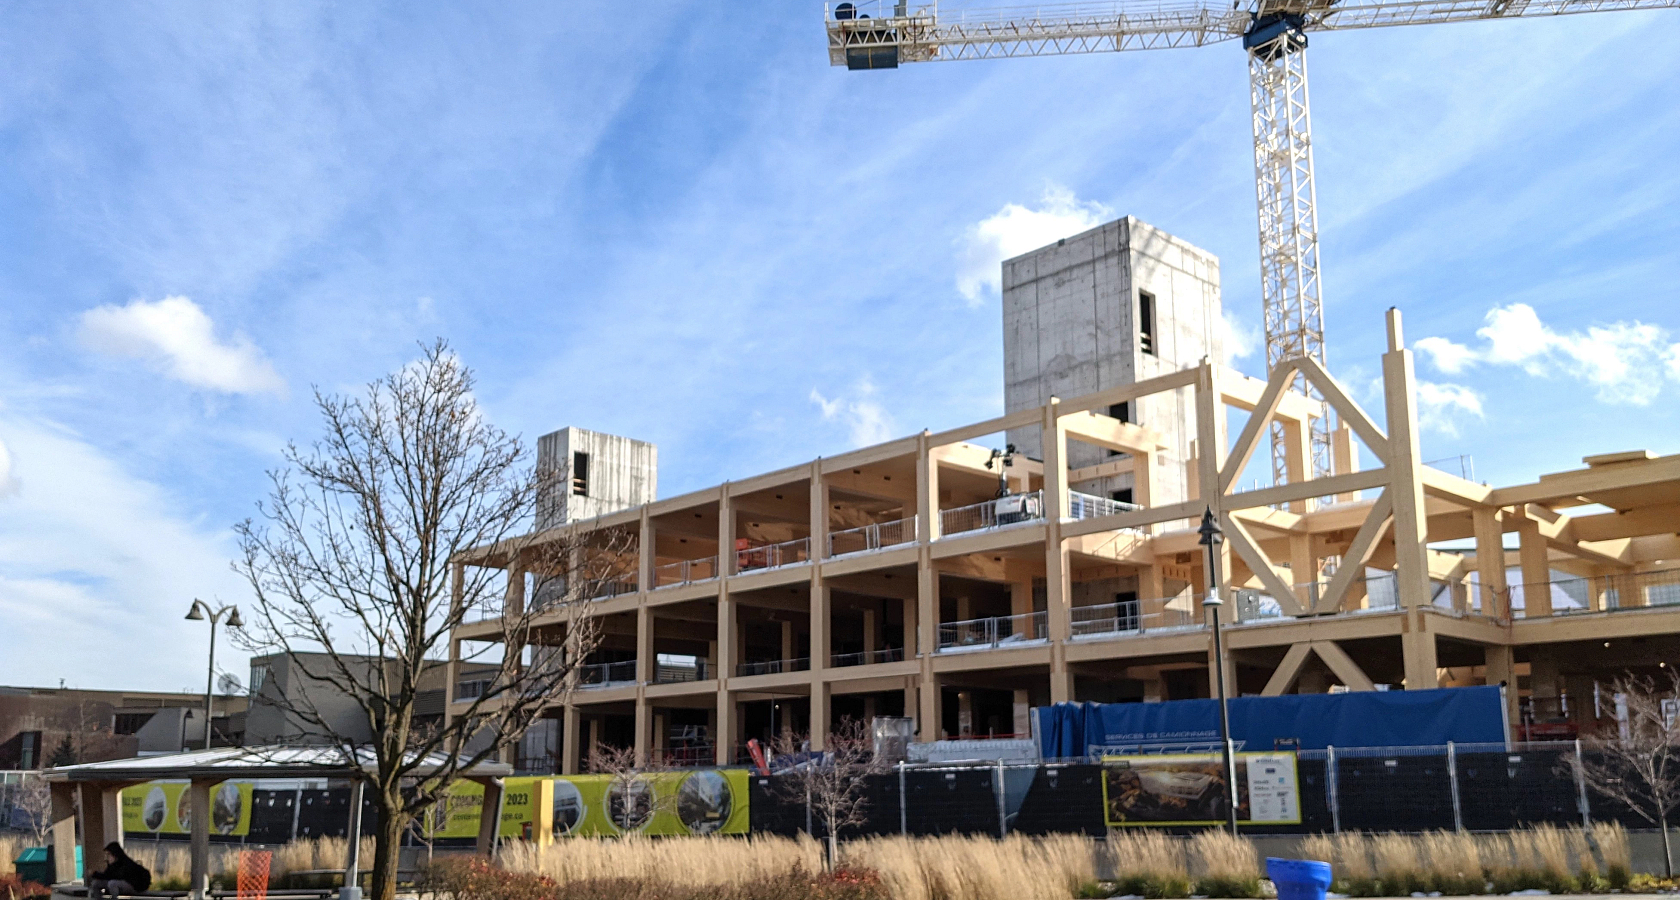 Ontario’s first mass timber academic building is taking shape at Centennial College Image